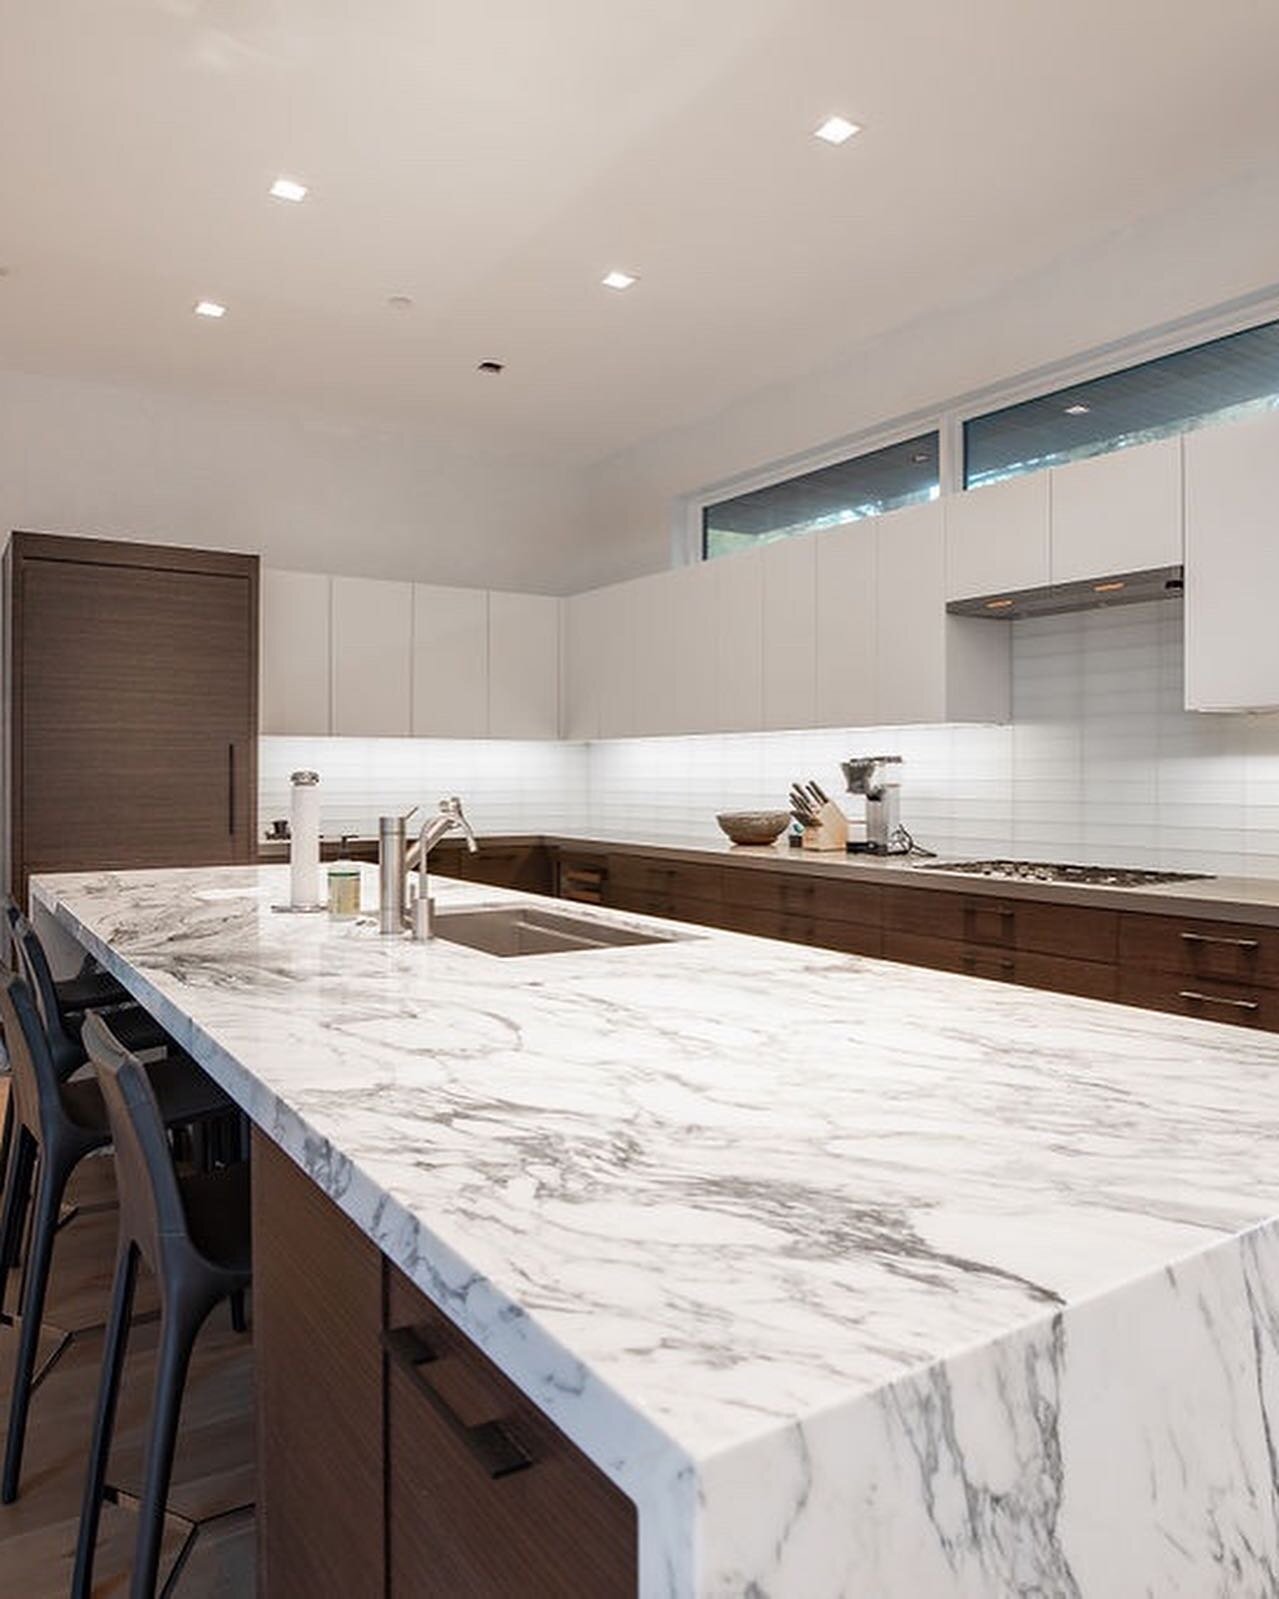 We love a marble kitchen moment 
#kitchencountertops #marbleslabsoftheday #aspenarchitect #architecturephotography